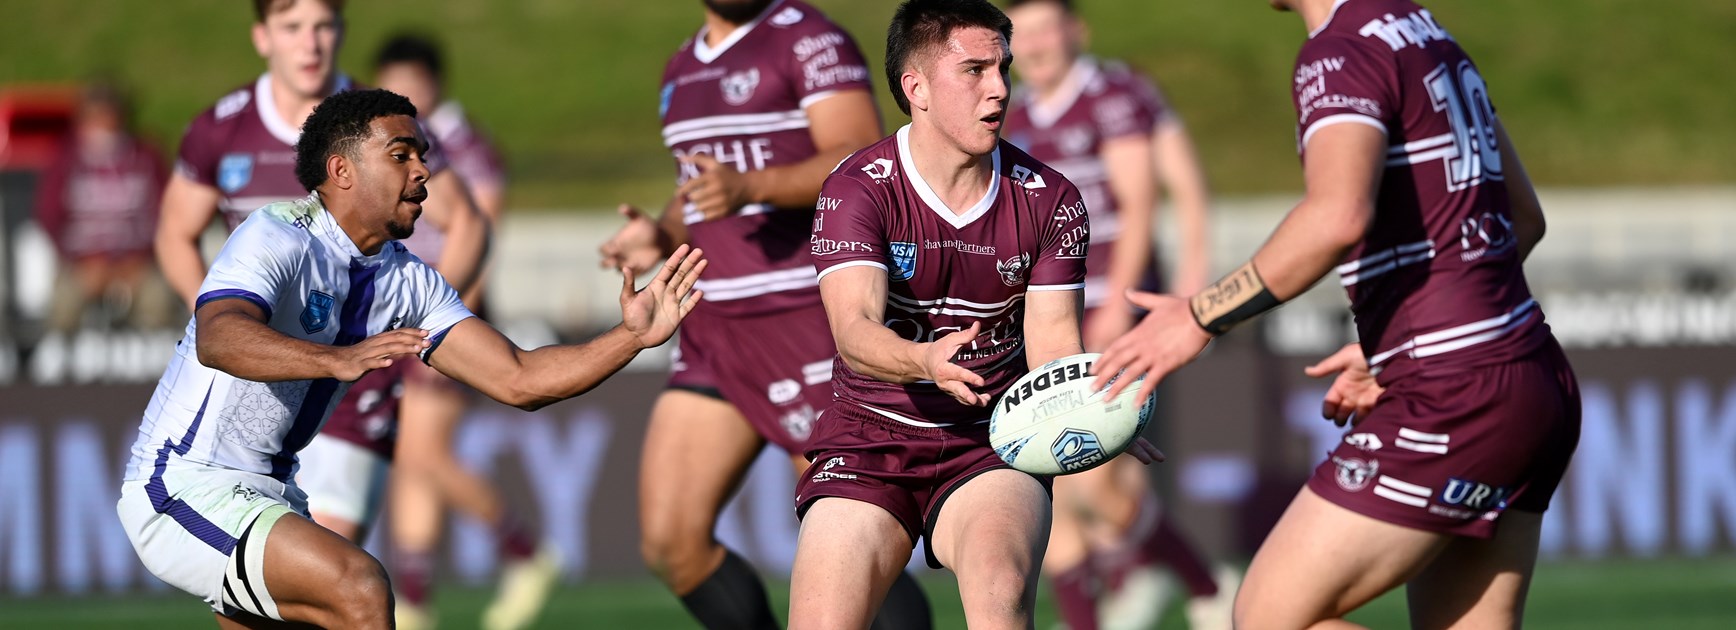 Sea Eagles lose to Storm in Jersey Flegg